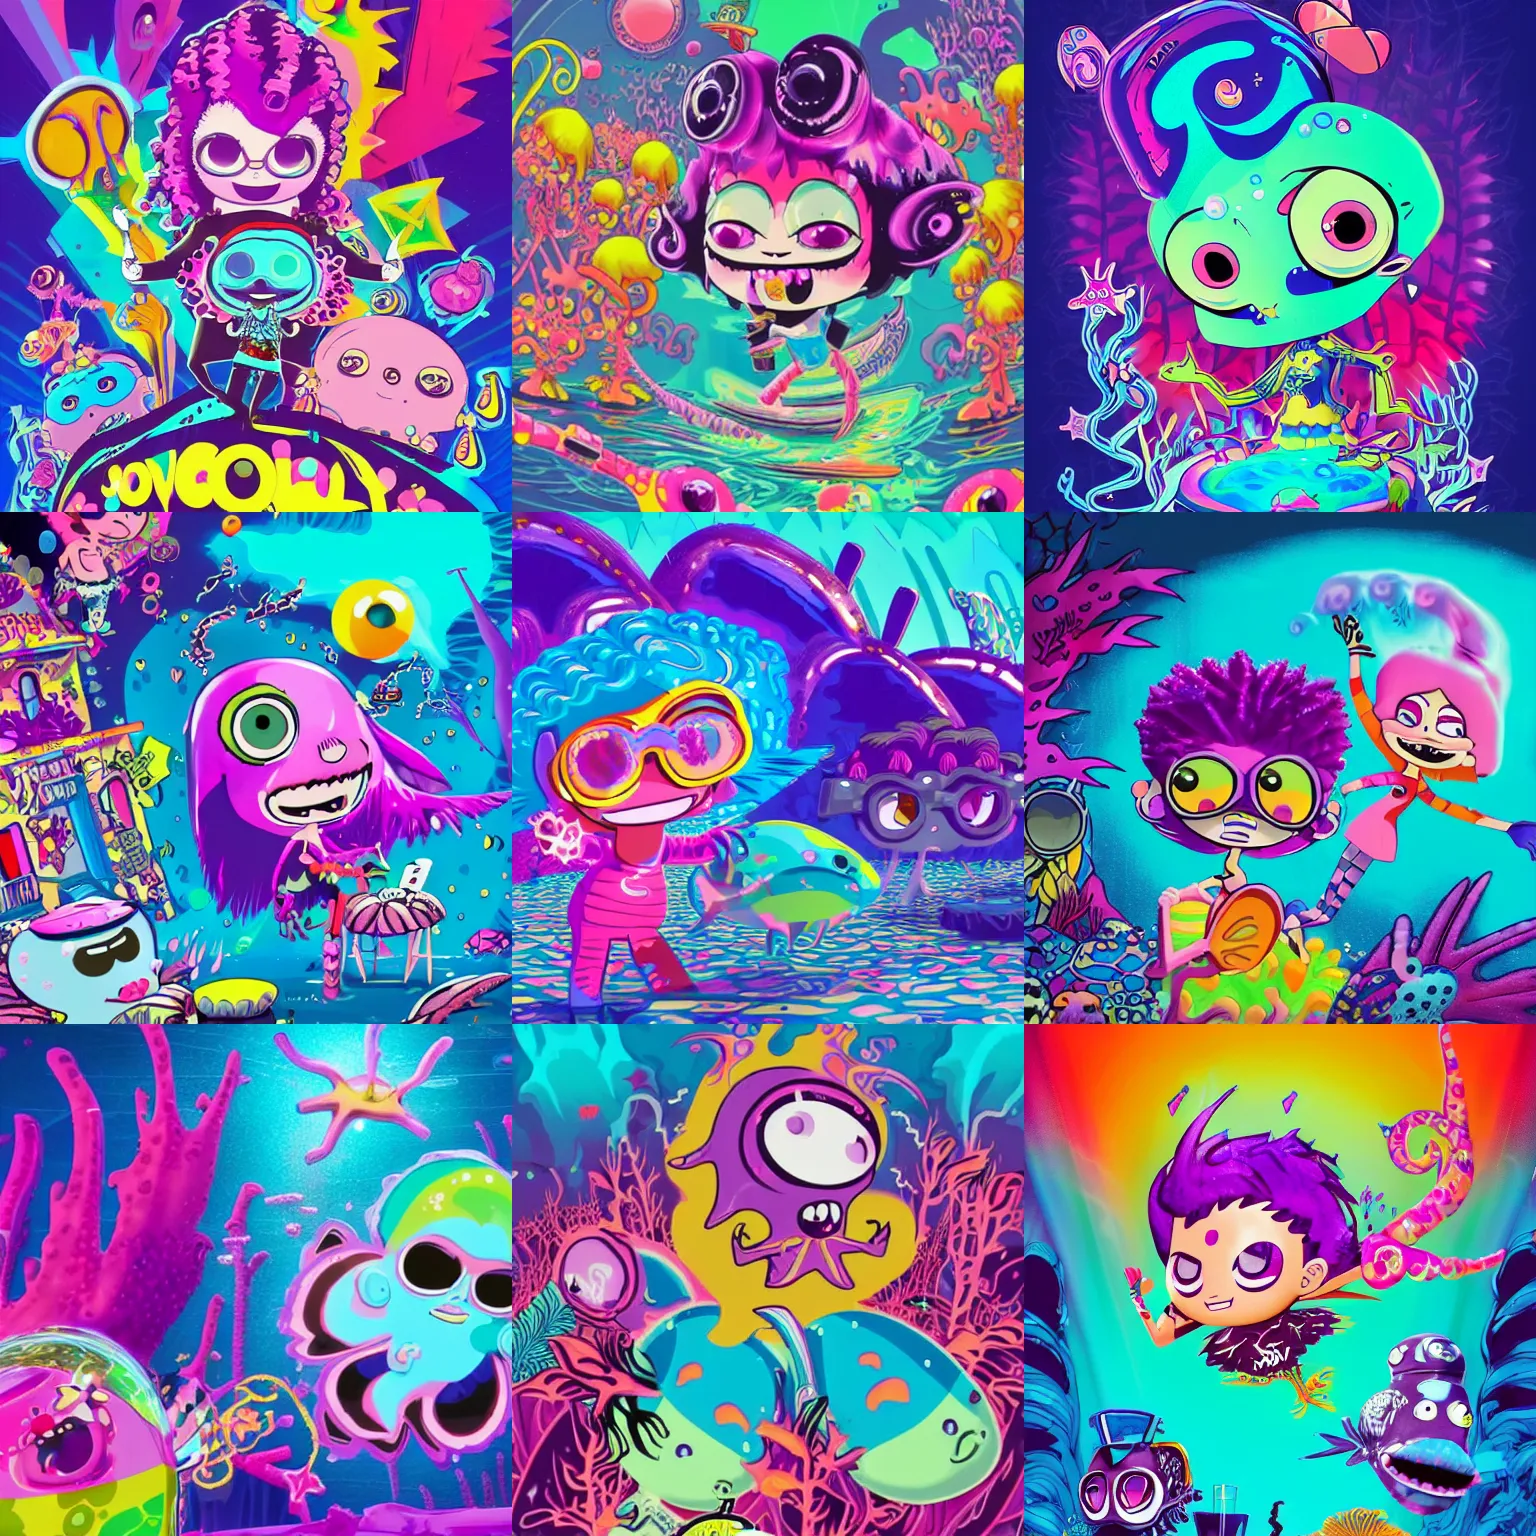 Prompt: lovely psychic pastel punk rocker vampiric lisa frank electrifying rockstar background designs of vibrant underwater locations filled with fish and coral by genndy tartakovsky and splatoon by nintendo and the psychonauts franchise by doublefine tim shafer artists for the new hotel transylvania film